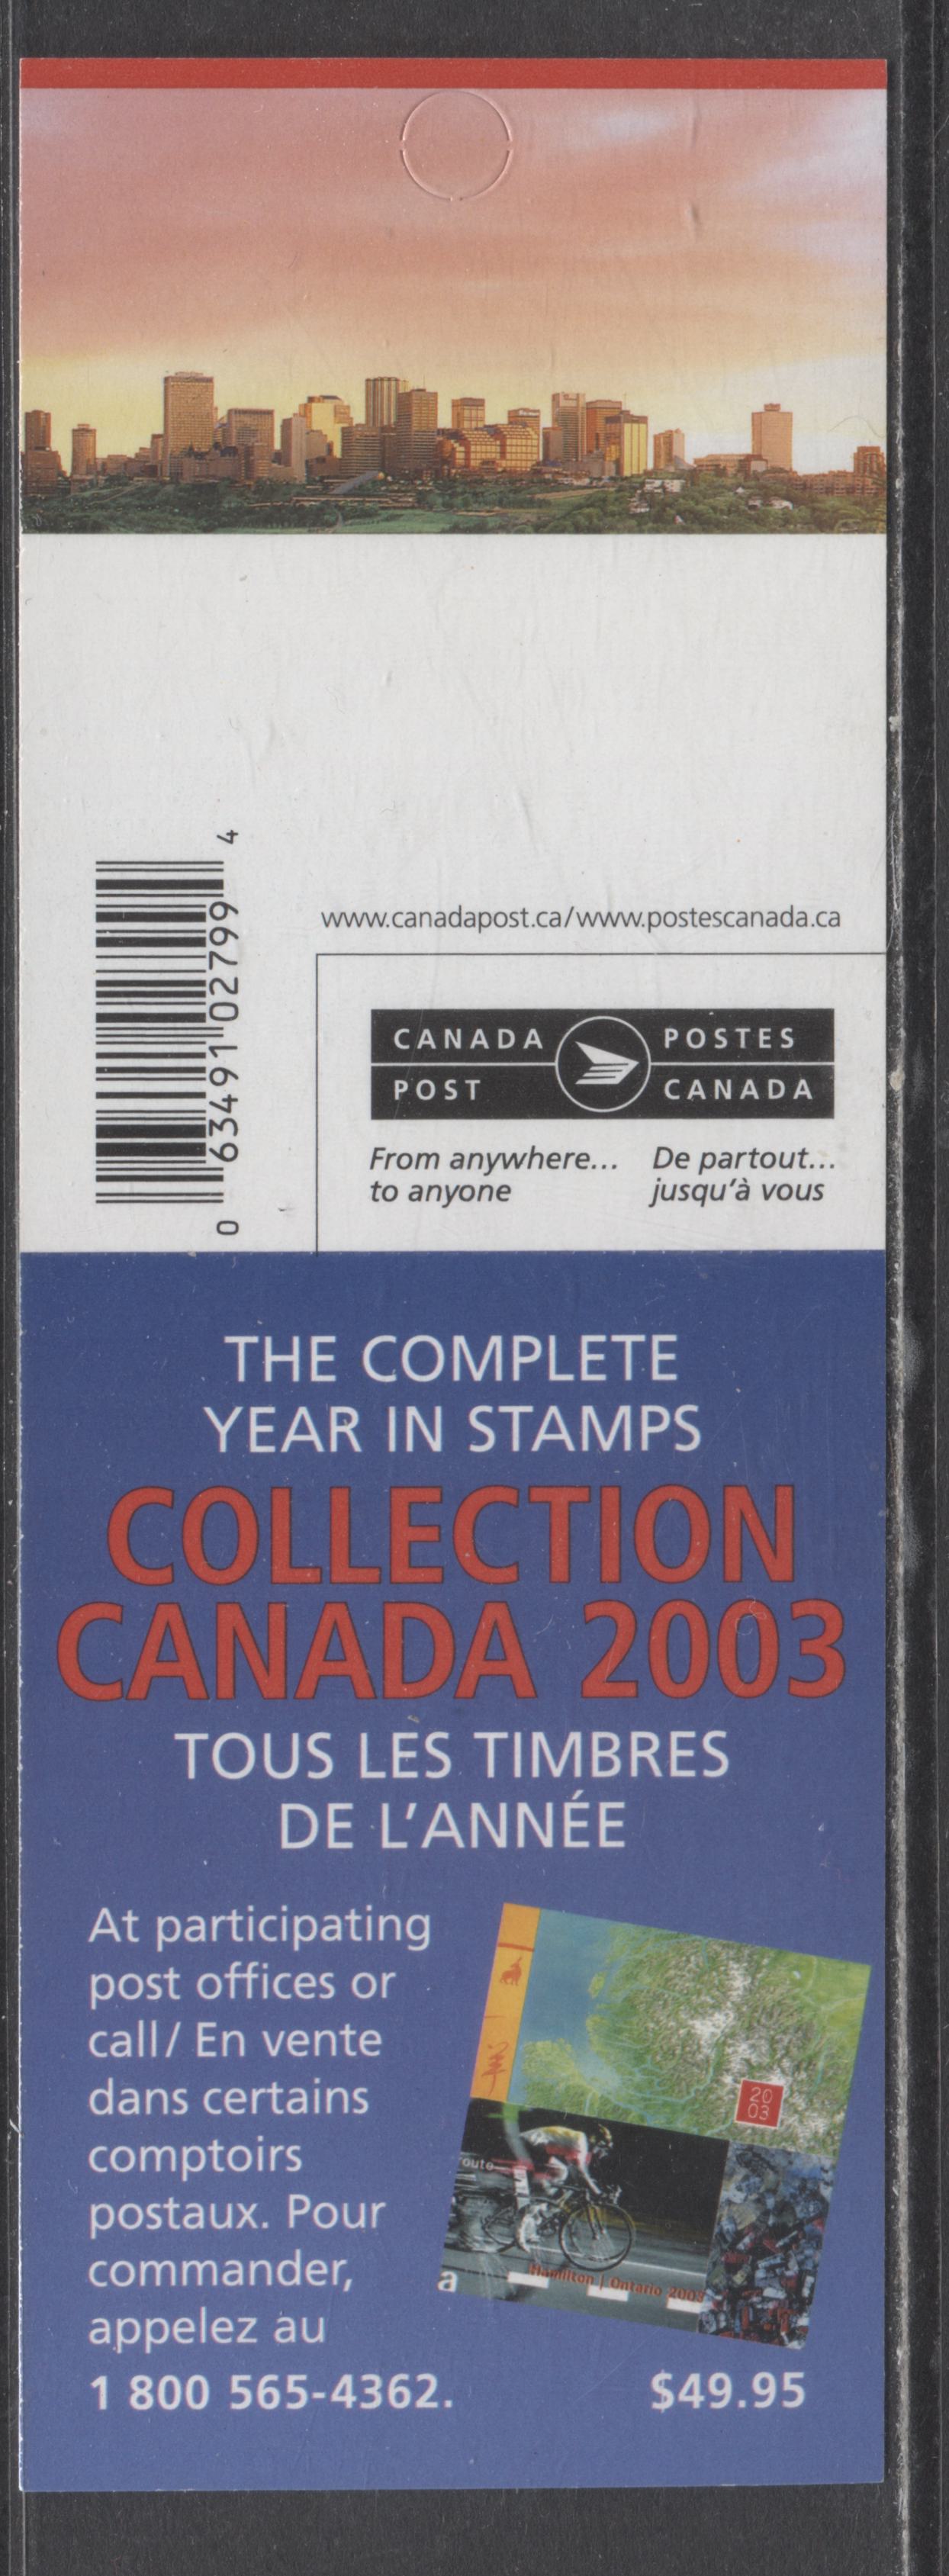 Lot 2 Canada #BK280 49c Multicolored Flag Over Edmonton, 2003-2004 Definitive Issues, A VFNH Booklet Of 10 On TRC Paper, DF/HF With Narrow Roulette, Barcode Ending In 02799 4, Weak Tagging, Tag Splotches om 1/2 and 2/1, $11